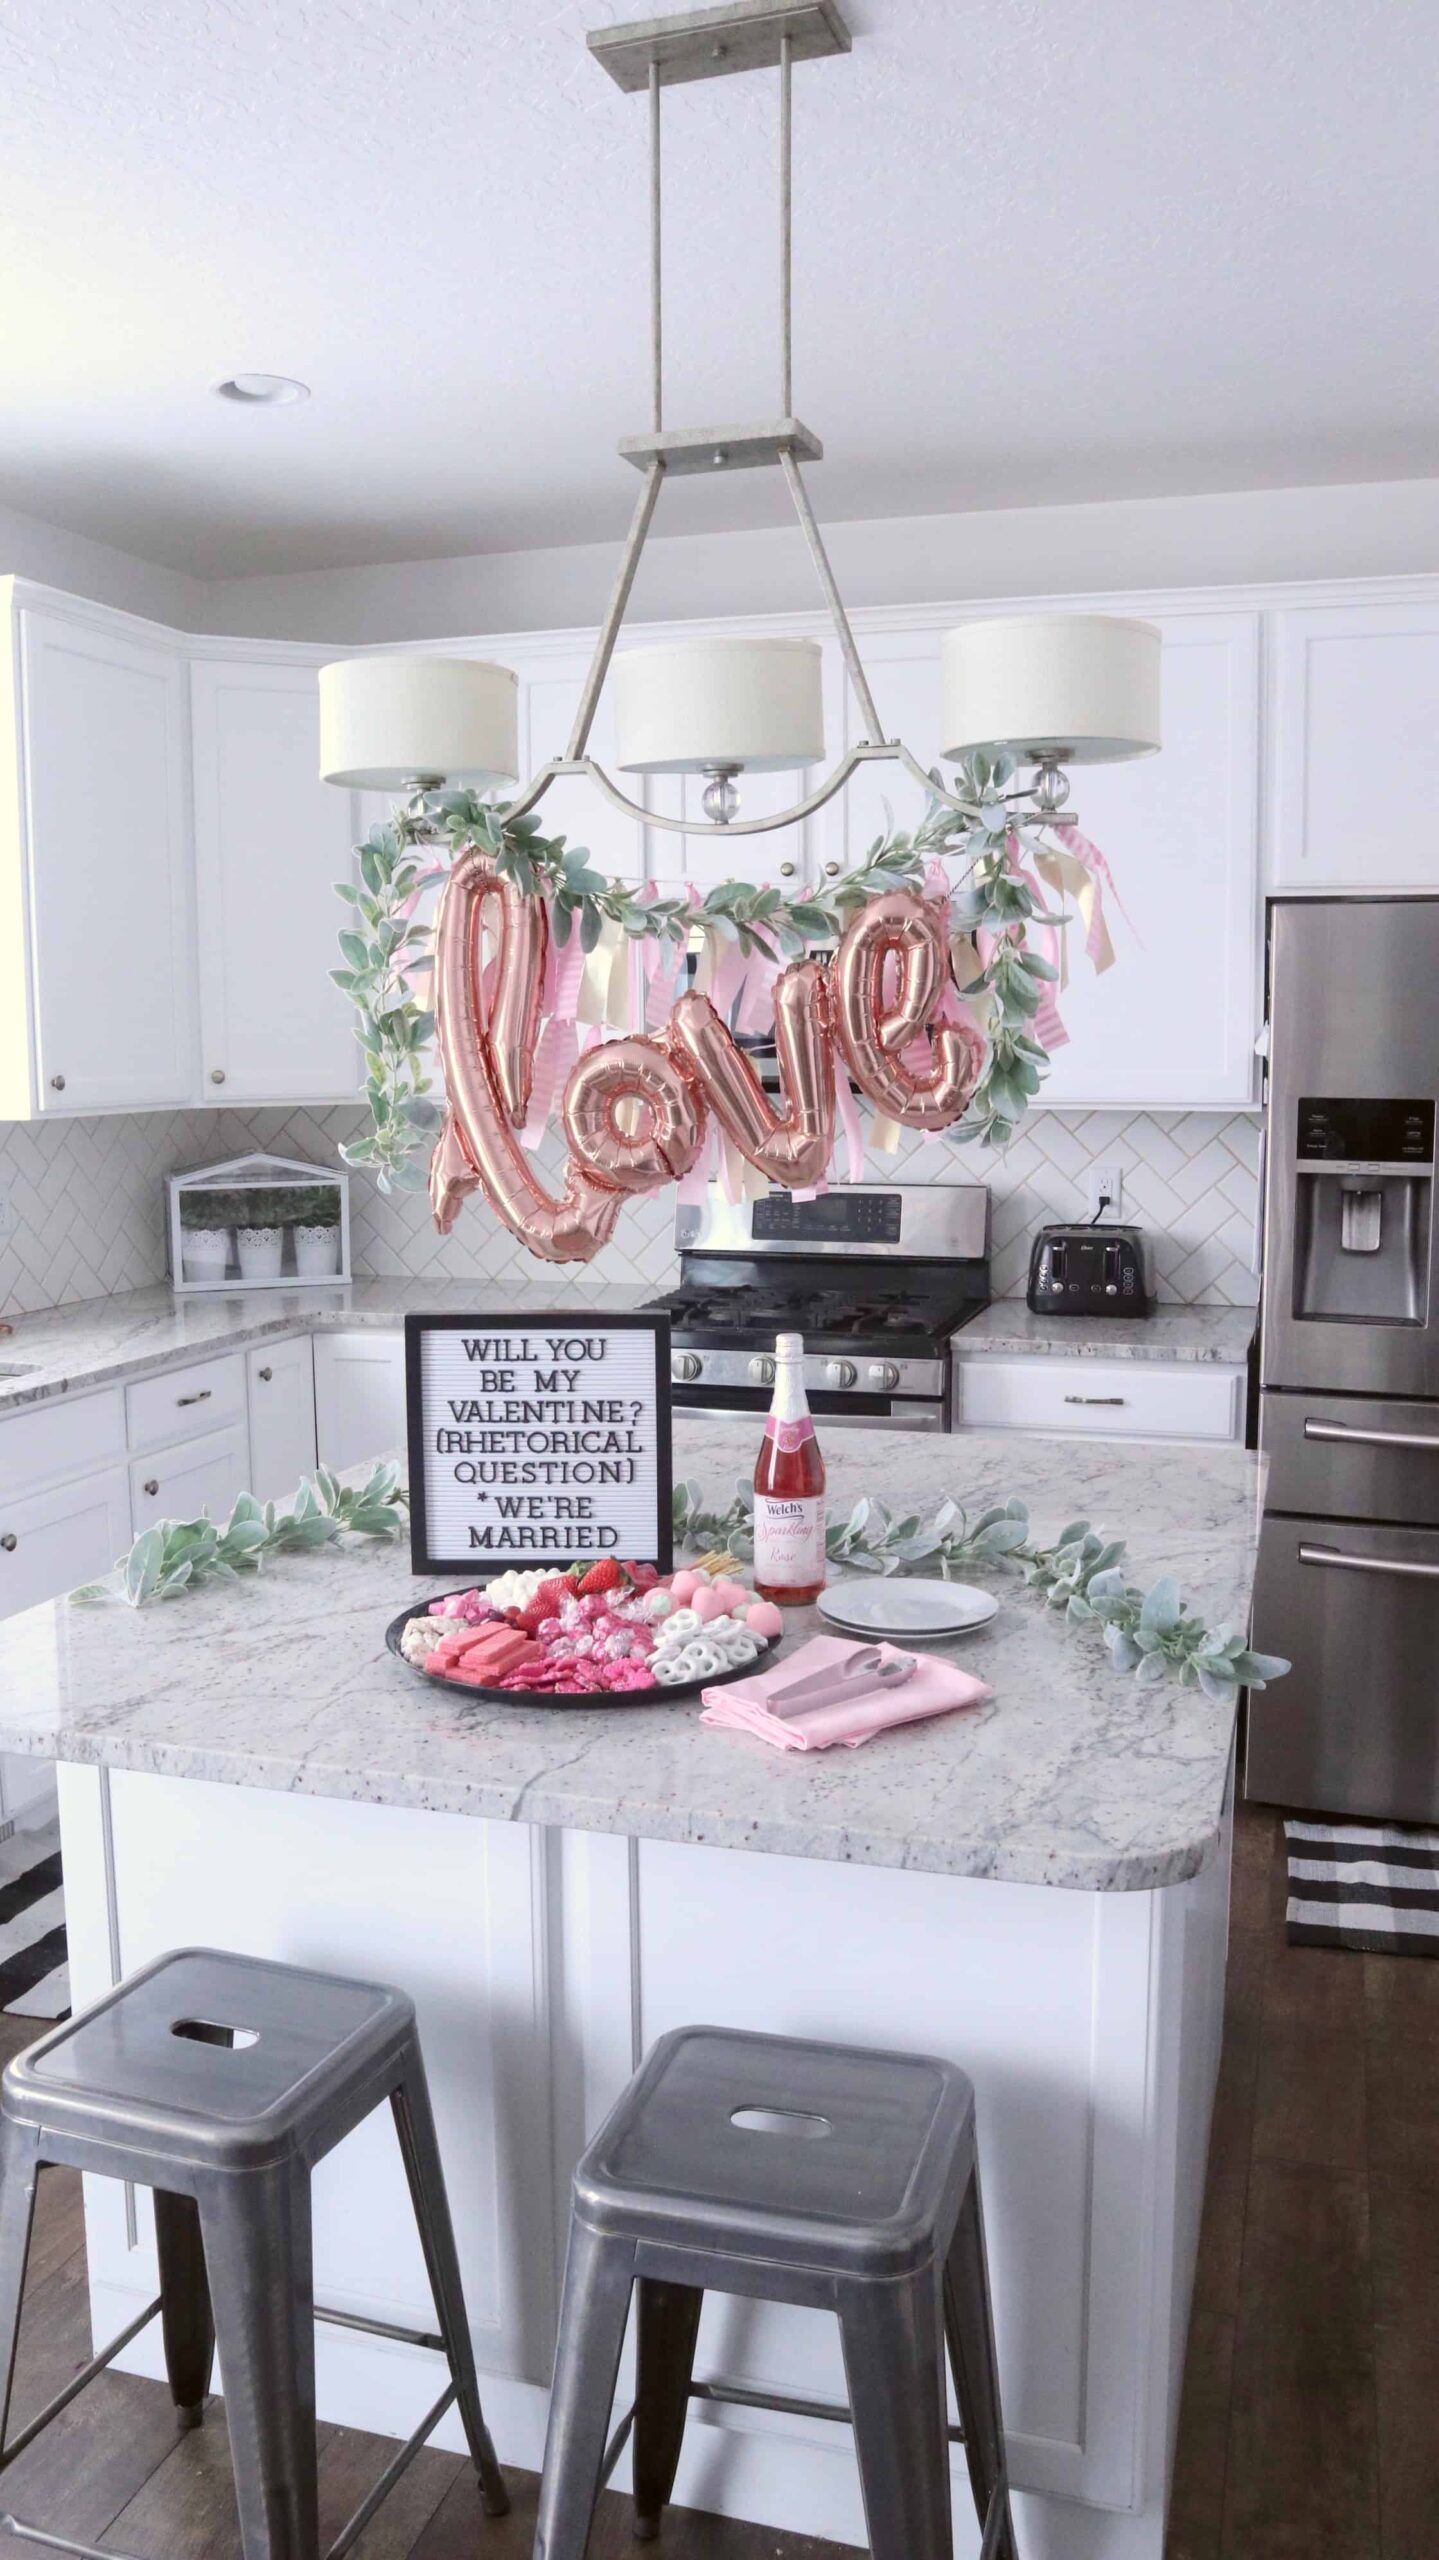 VALENTINE'S DAY DECORATIONS AROUND THE HOUSE | Dimples and Tangles